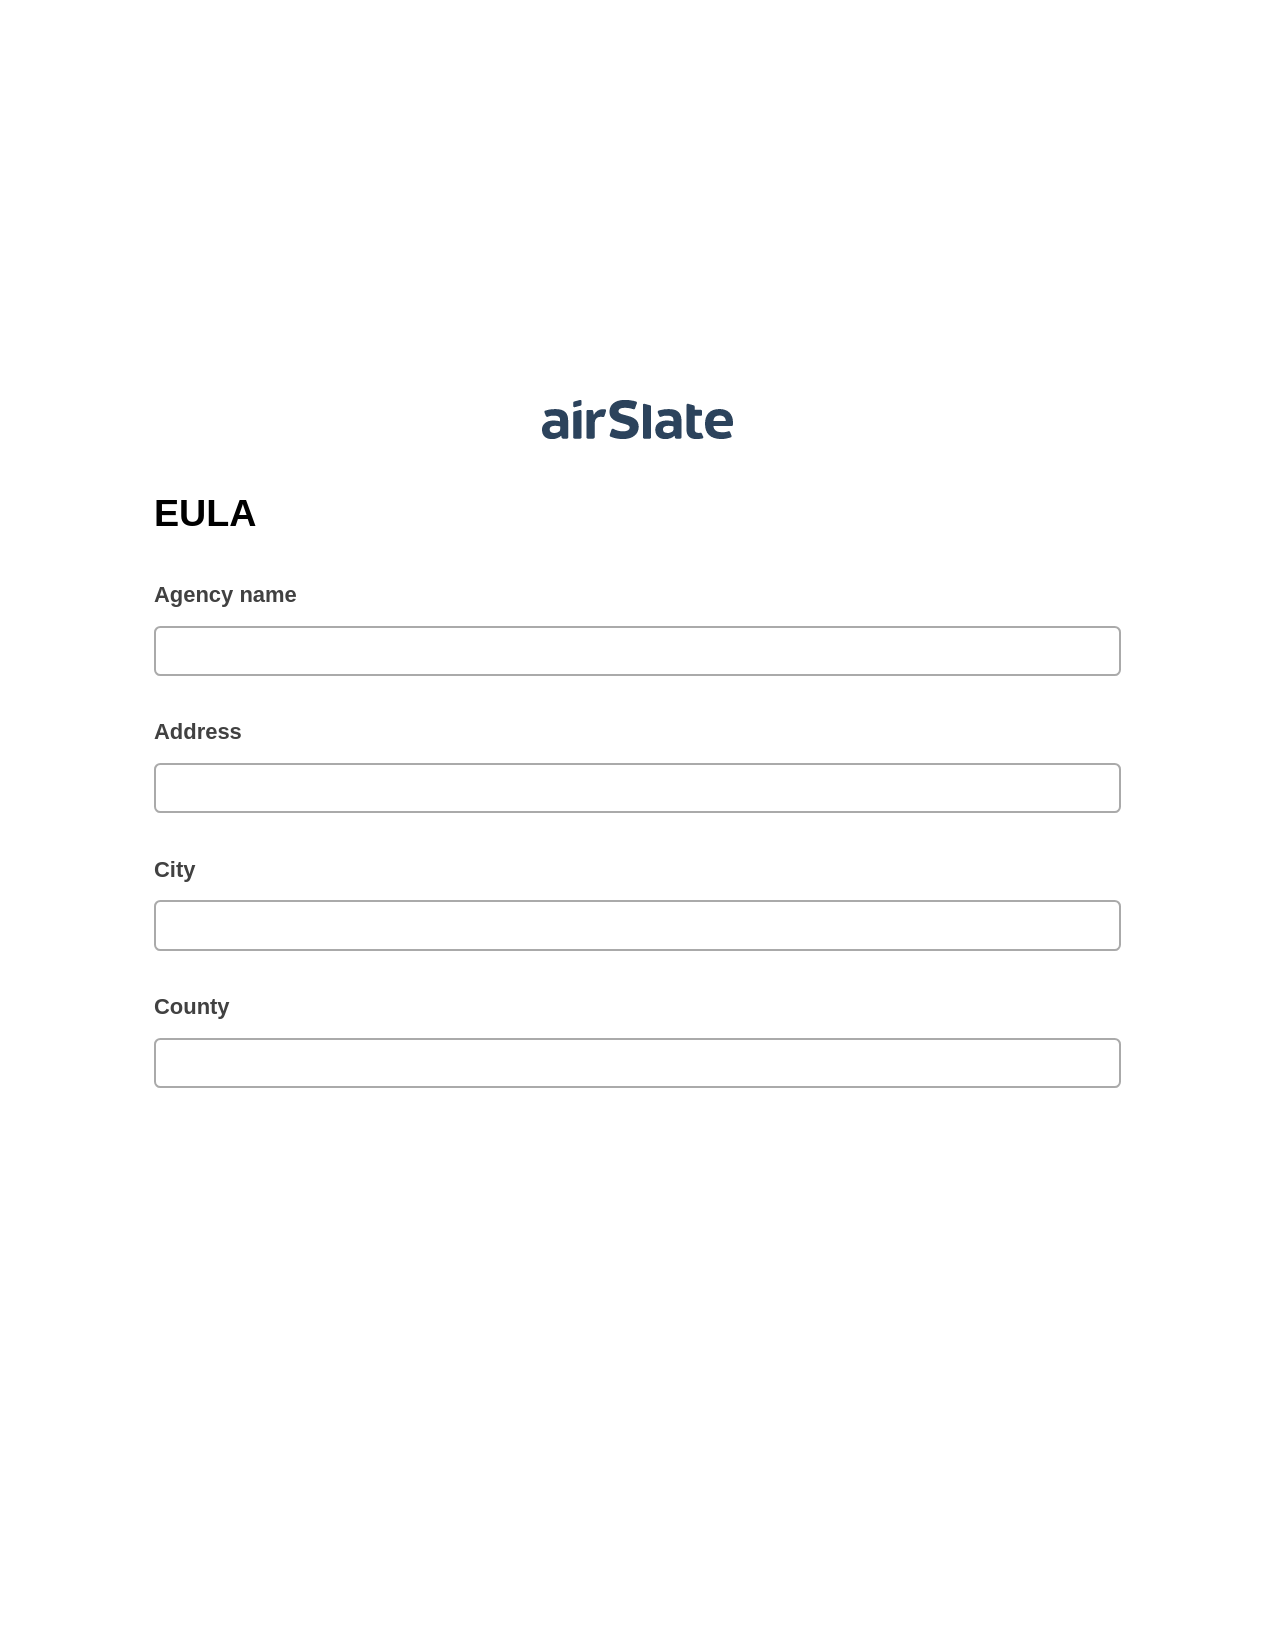 EULA Pre-fill from Google Sheet Dropdown Options Bot, Send a Slate with Roles Bot, Post-finish Document Bot